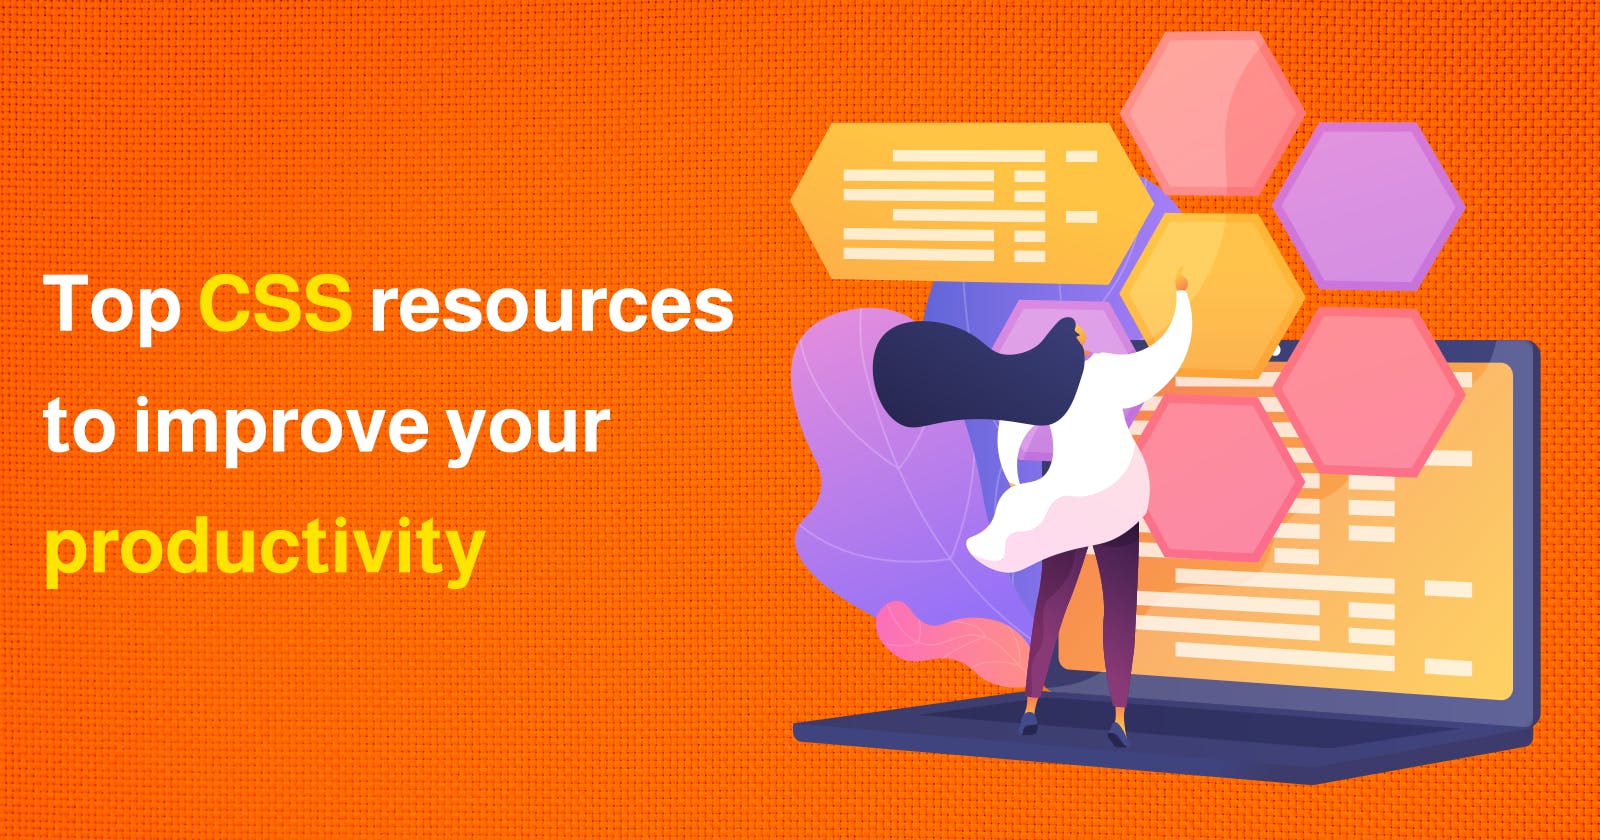 Top CSS resources to improve your productivity